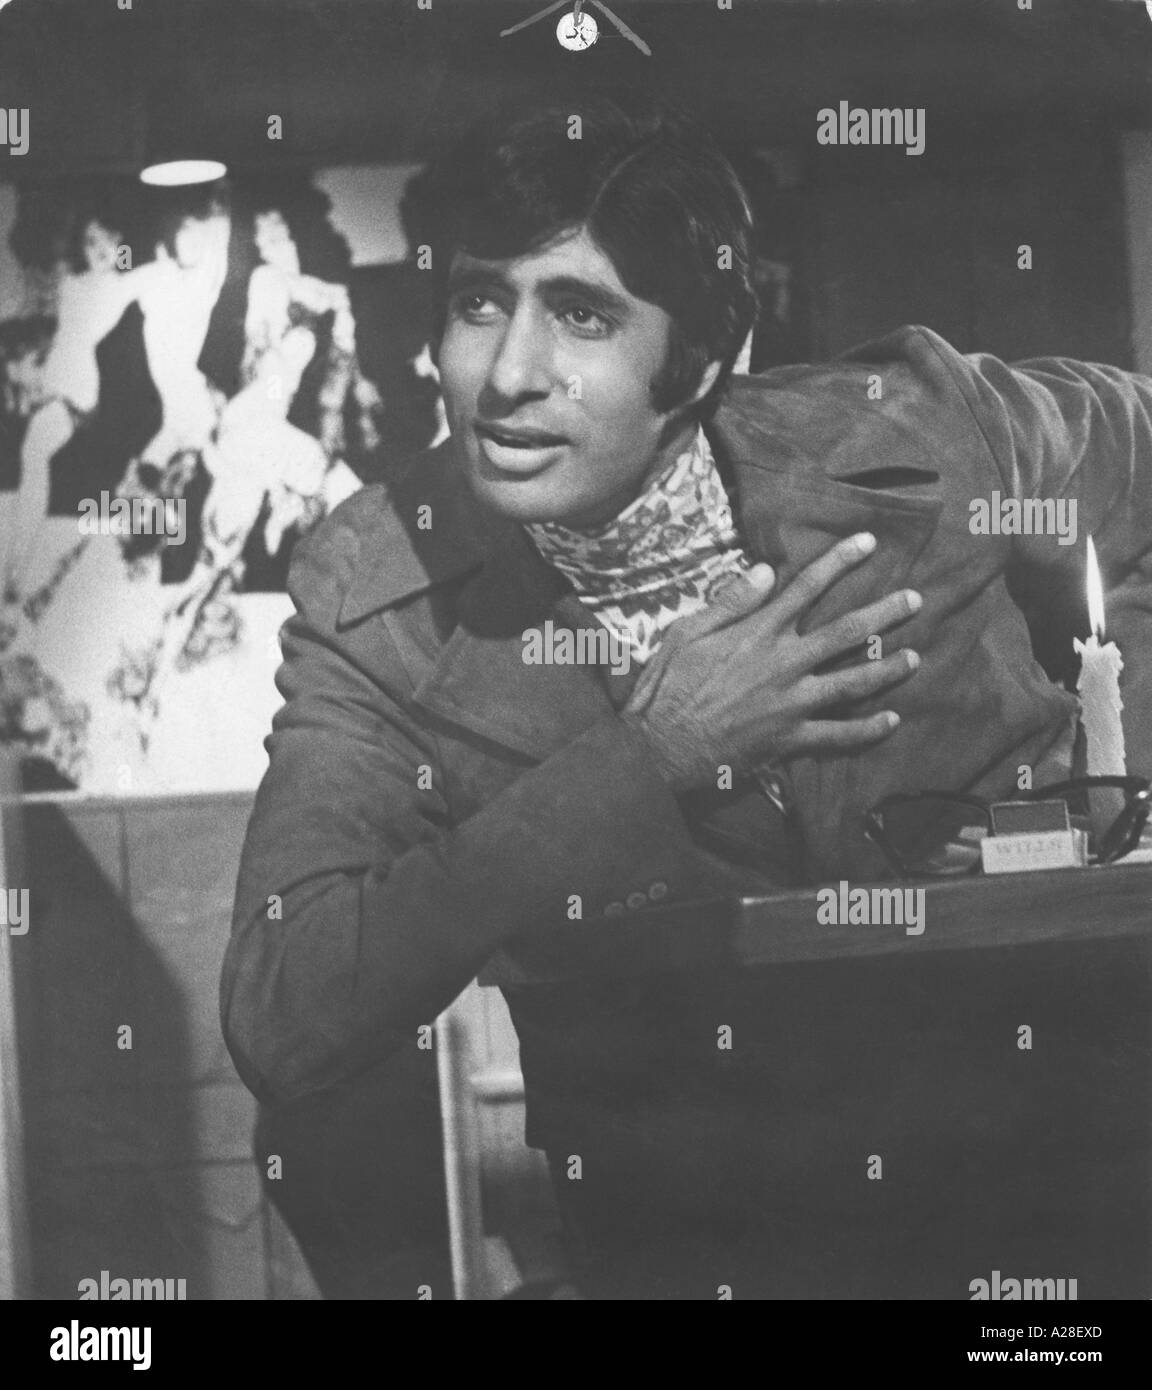 Indian Bollywood Film Star Actor Amitabh Bachchan in the movie Bombay to Goa Stock Photo